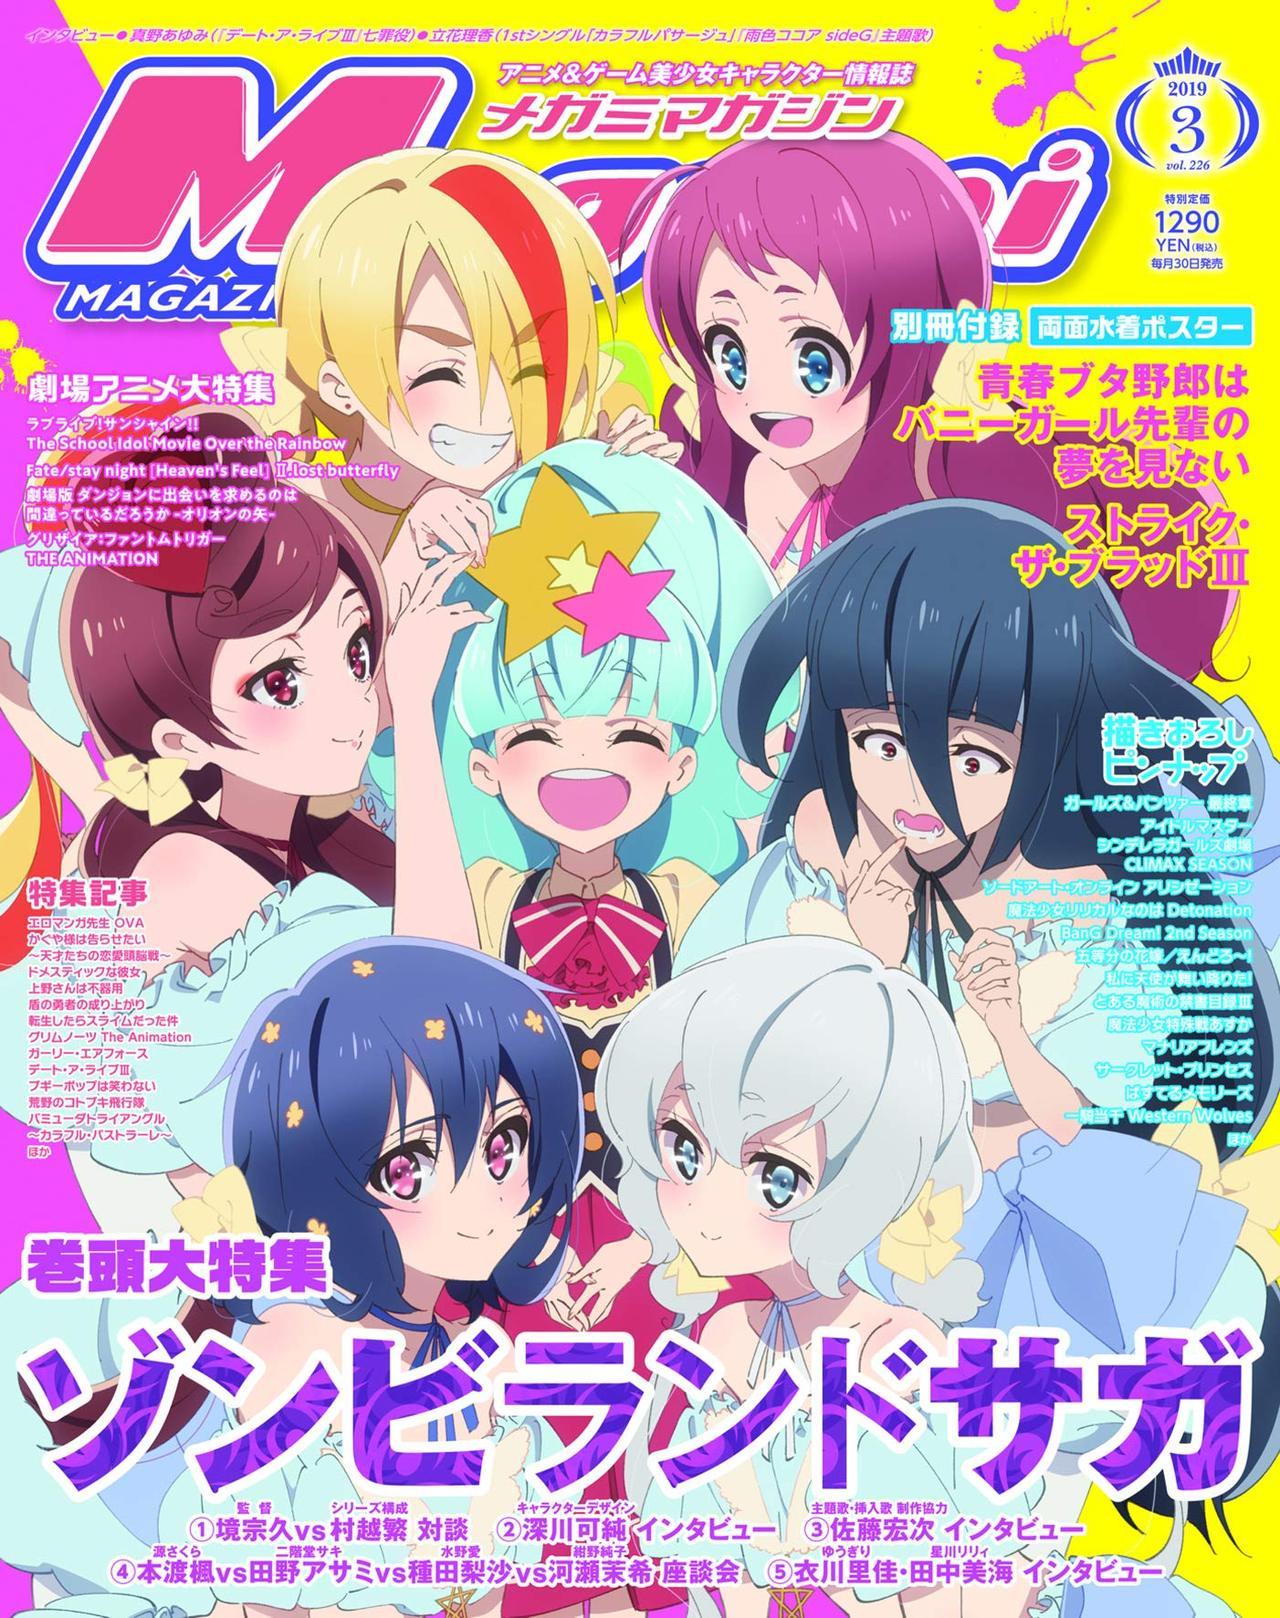 All Things Anime — Megami Magazine March 2019 Issue (#226) Cover -